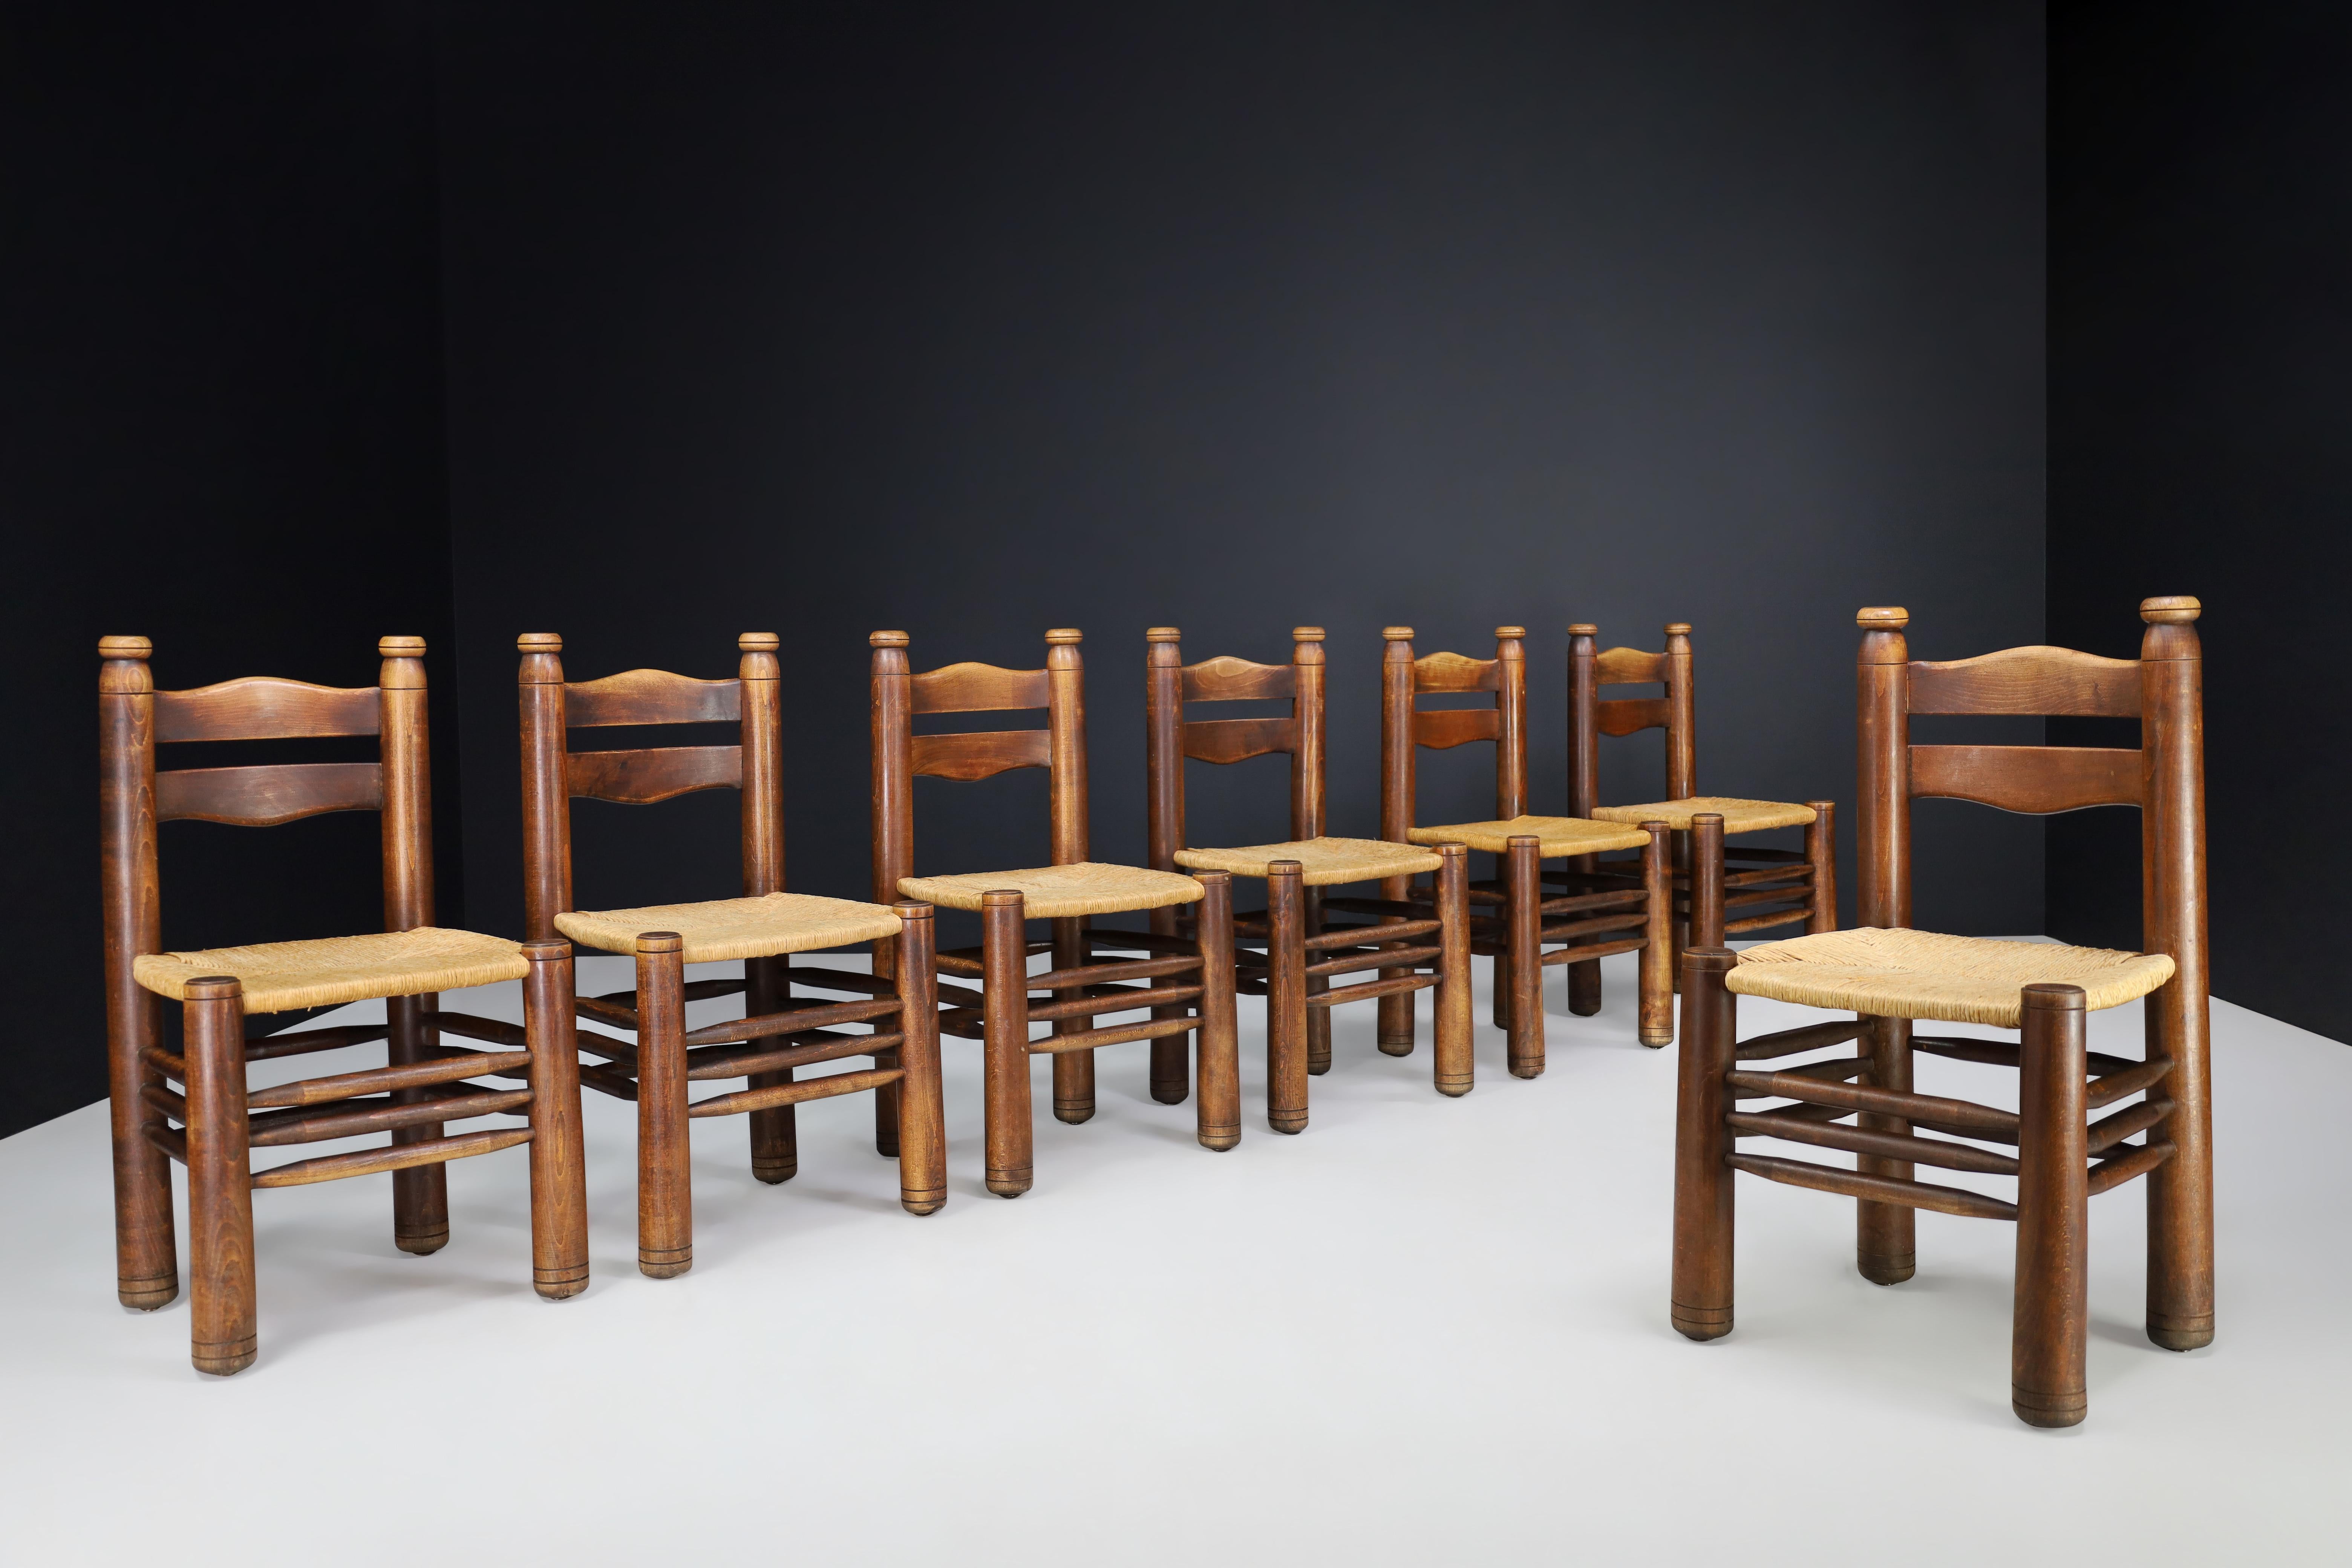 Handcrafted Dining room chairs in wood and rush, France, 1940s

These handcrafted dining room chairs are crafted from rustic wood and rush in the style of Charles Dudouyt, dating back to 1940s France. The chairs are in excellent condition,